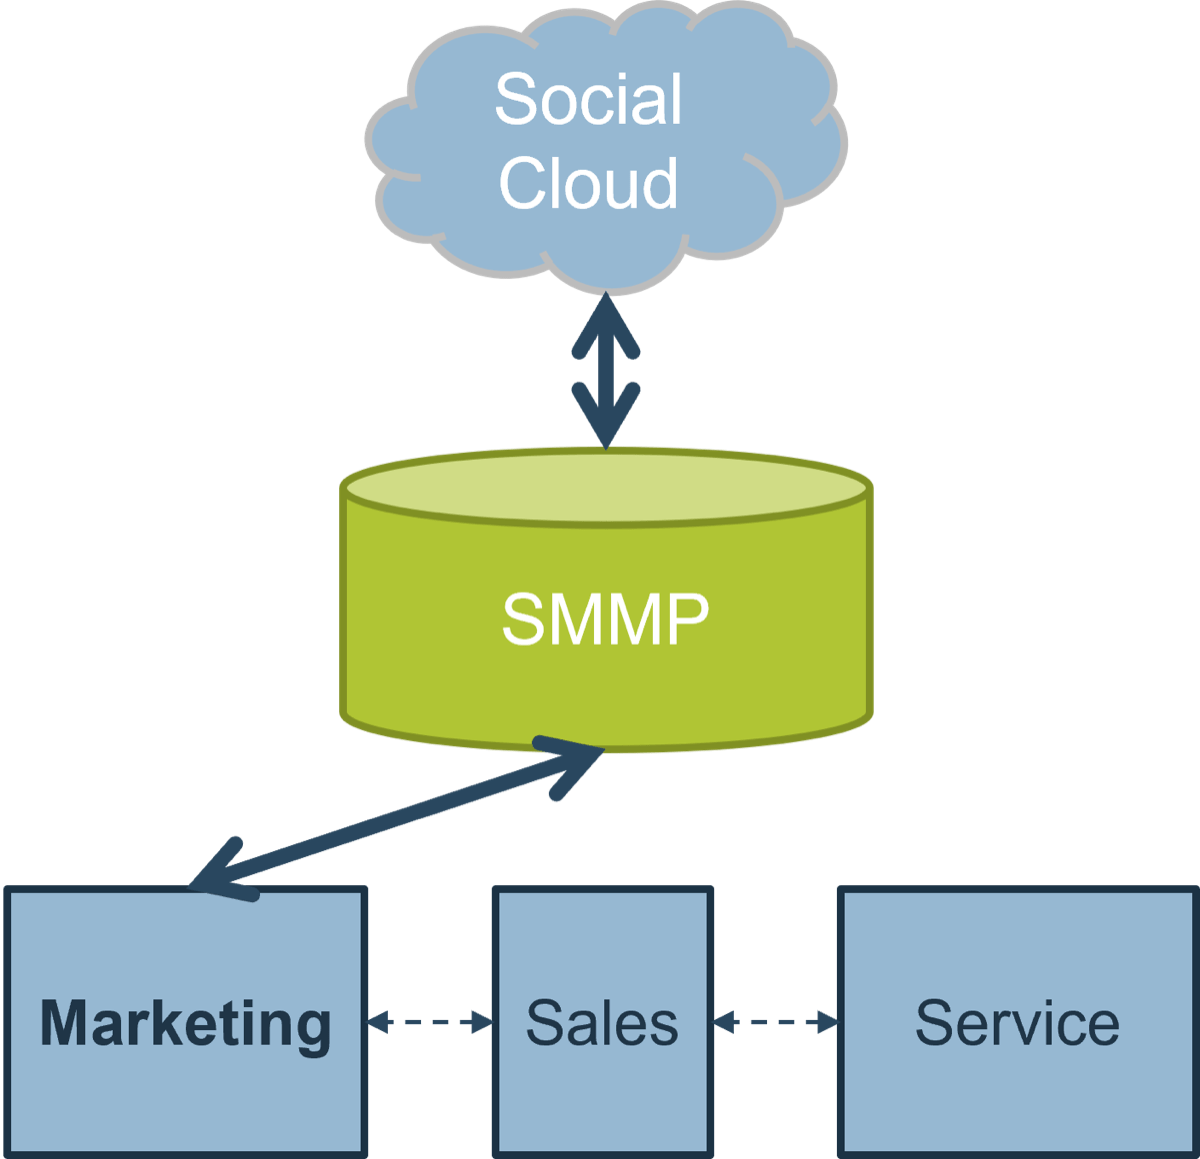 Visual of the Centralized Model with the 'Social Cloud' attached to the 'SMMP' attached to 'Marketing' attached to the 'Sales' and 'Service'